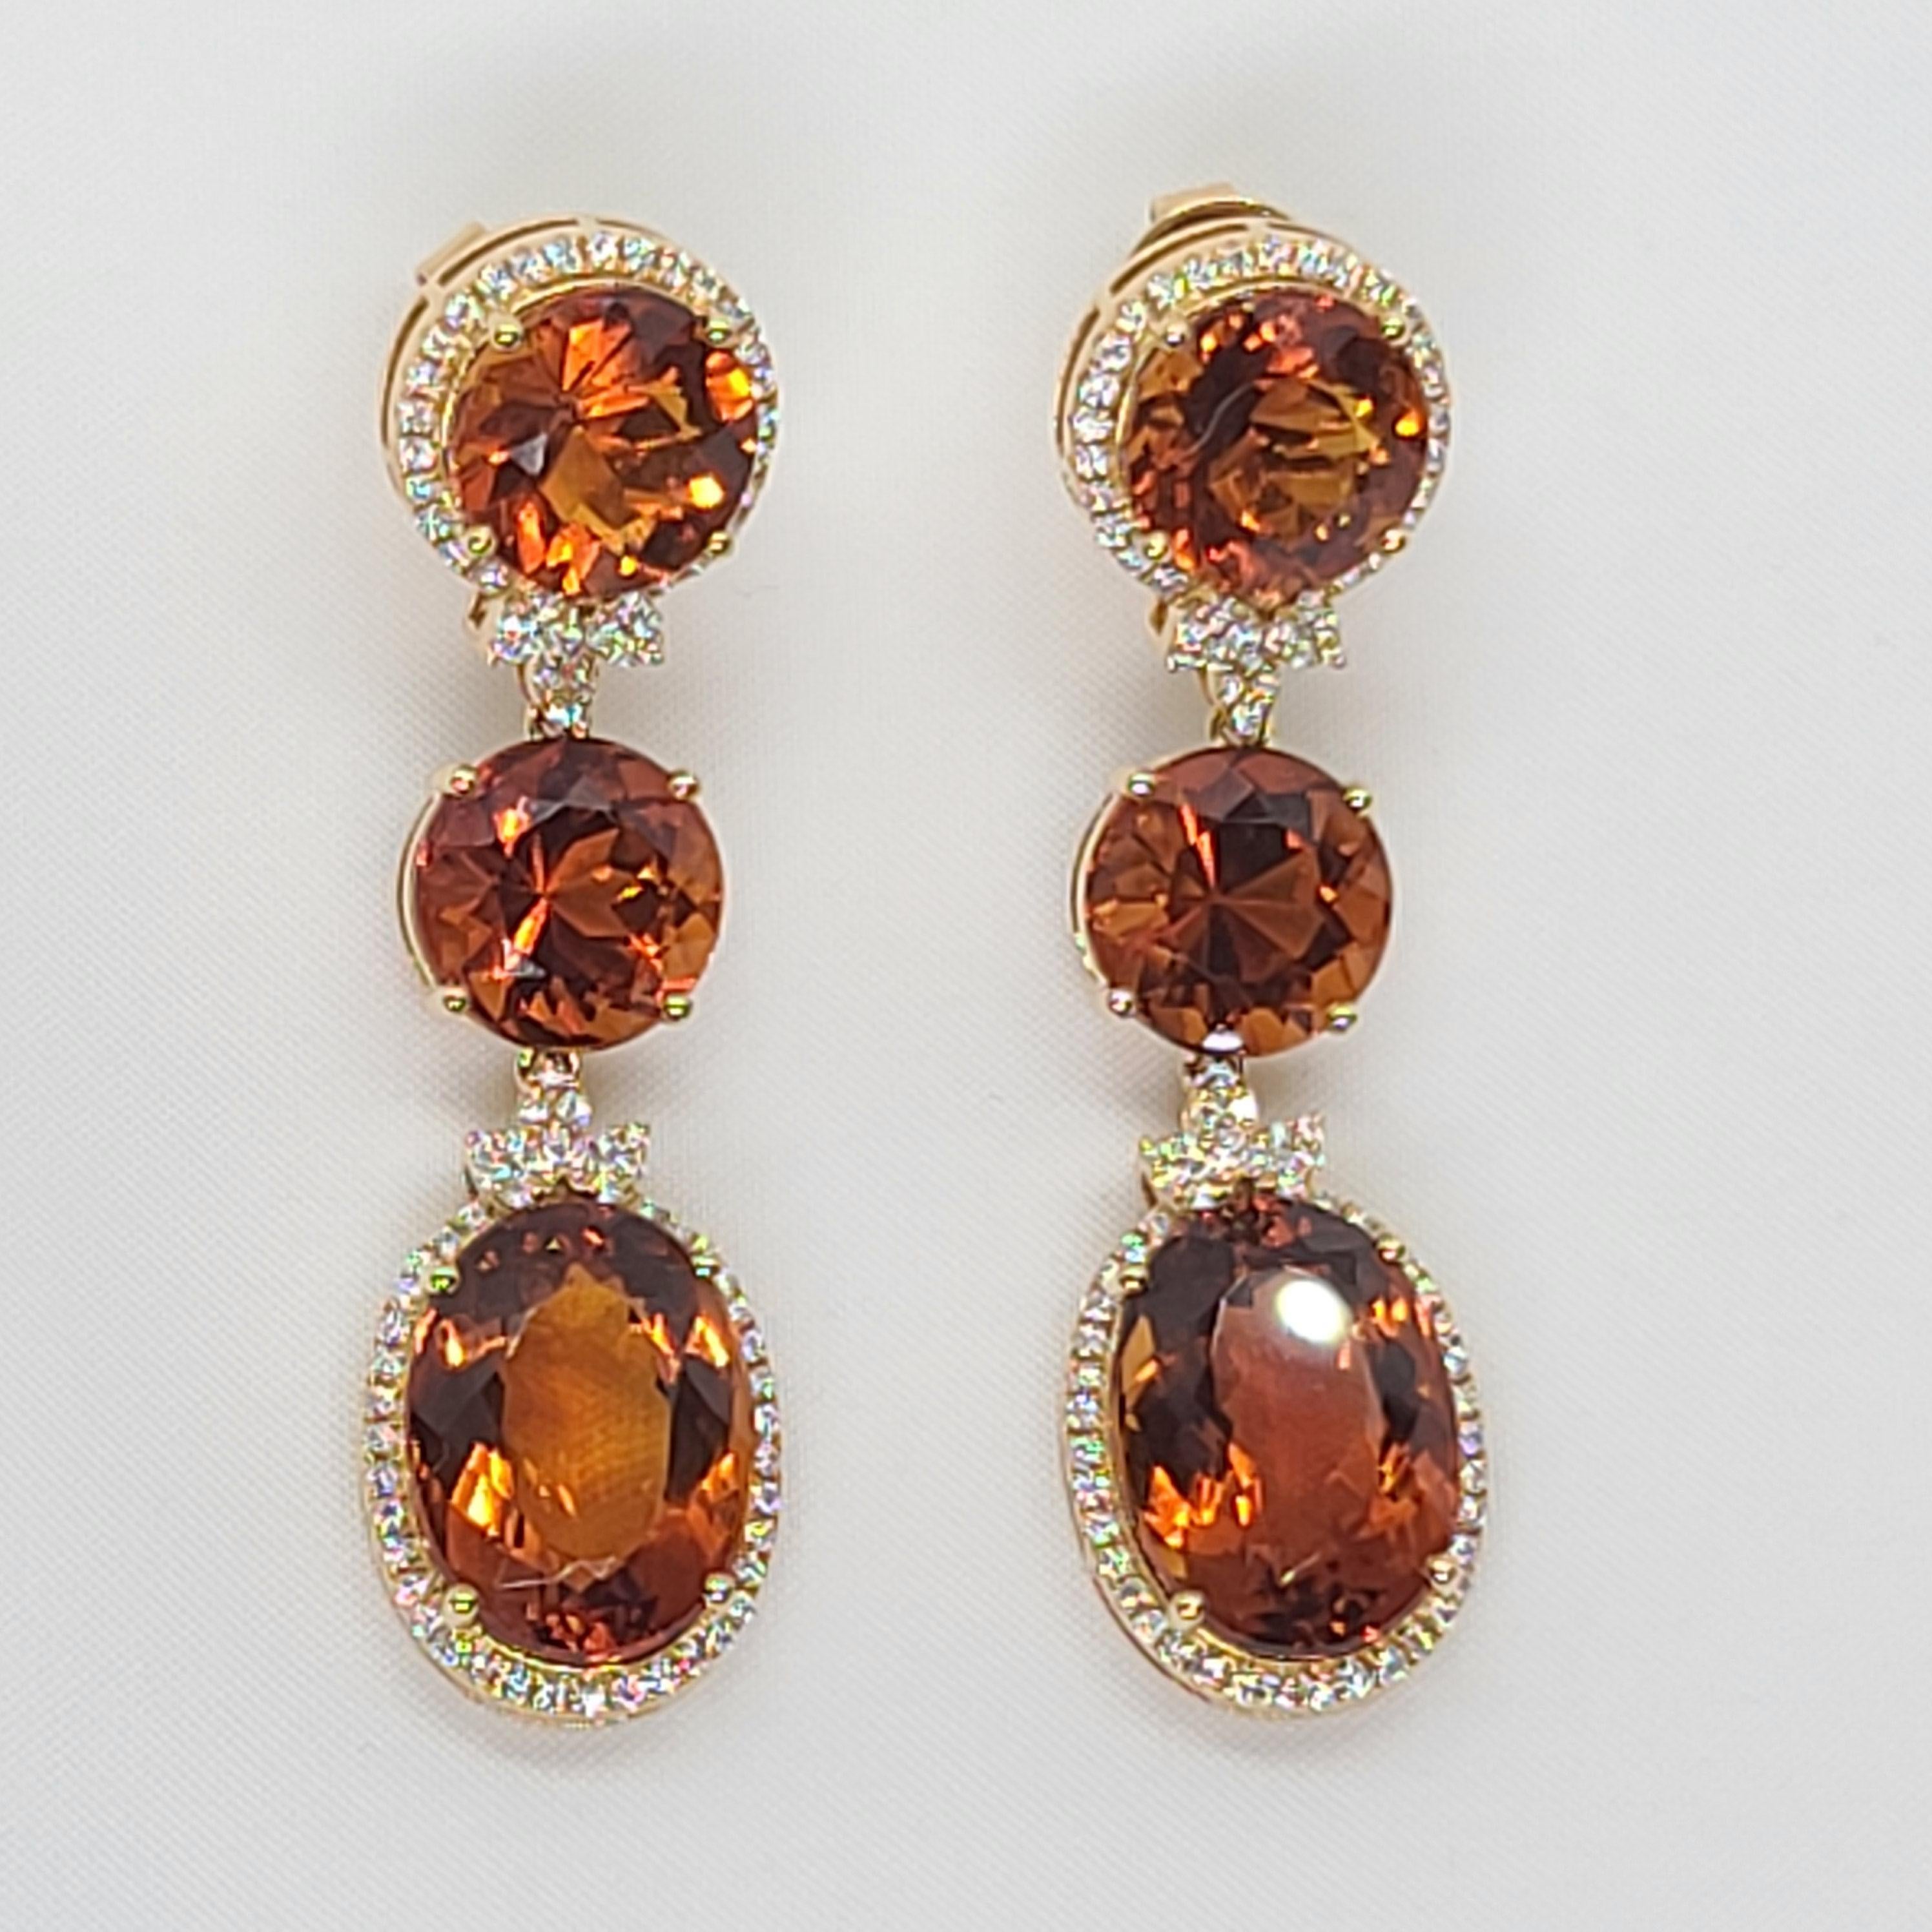 Modern 18 Karat Gold with Fire Royal Citrine and Diamonds Drop Dangle Earrings, One